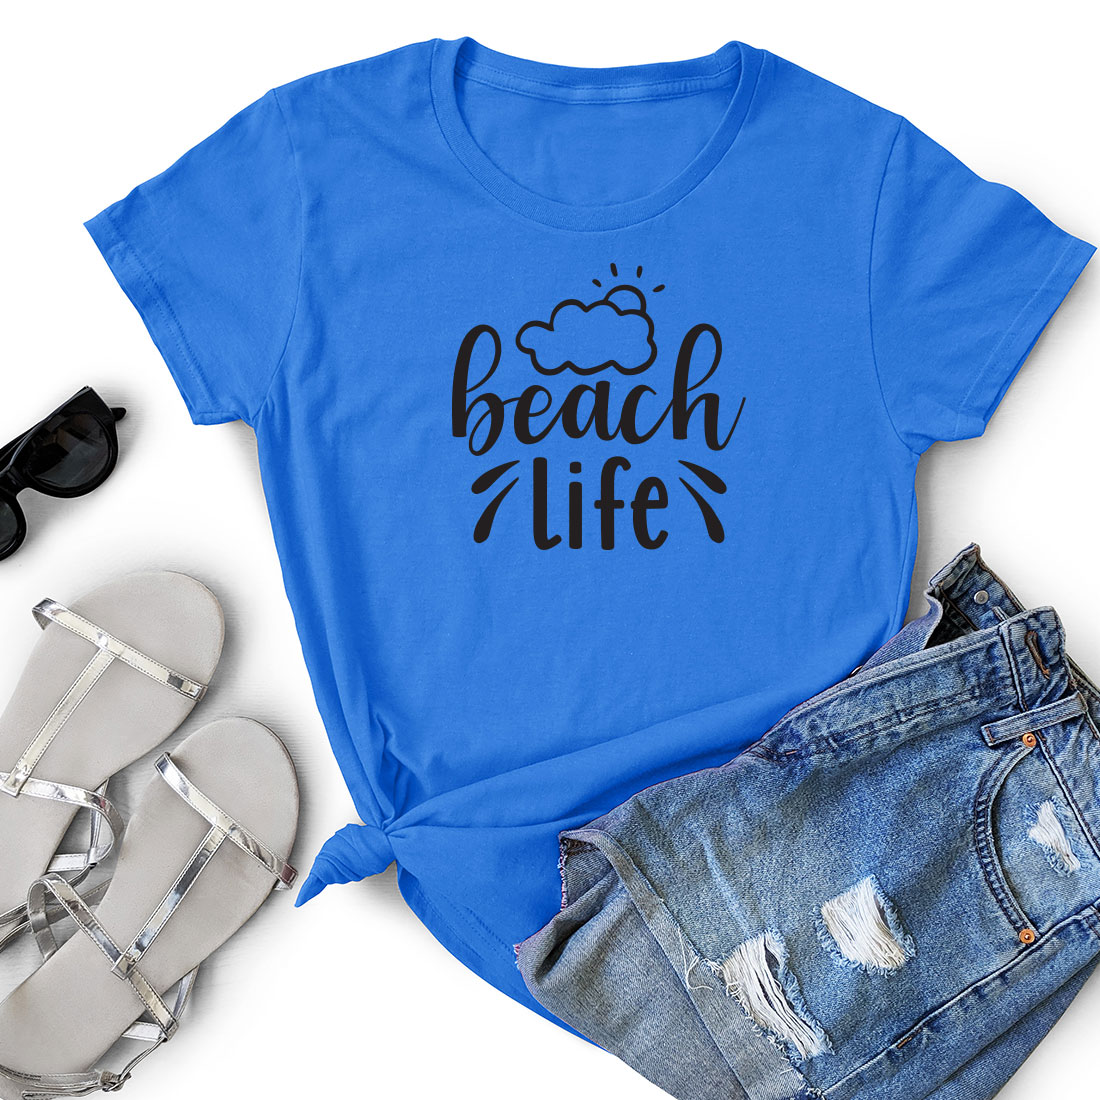 T - shirt that says beach life next to a pair of shorts.